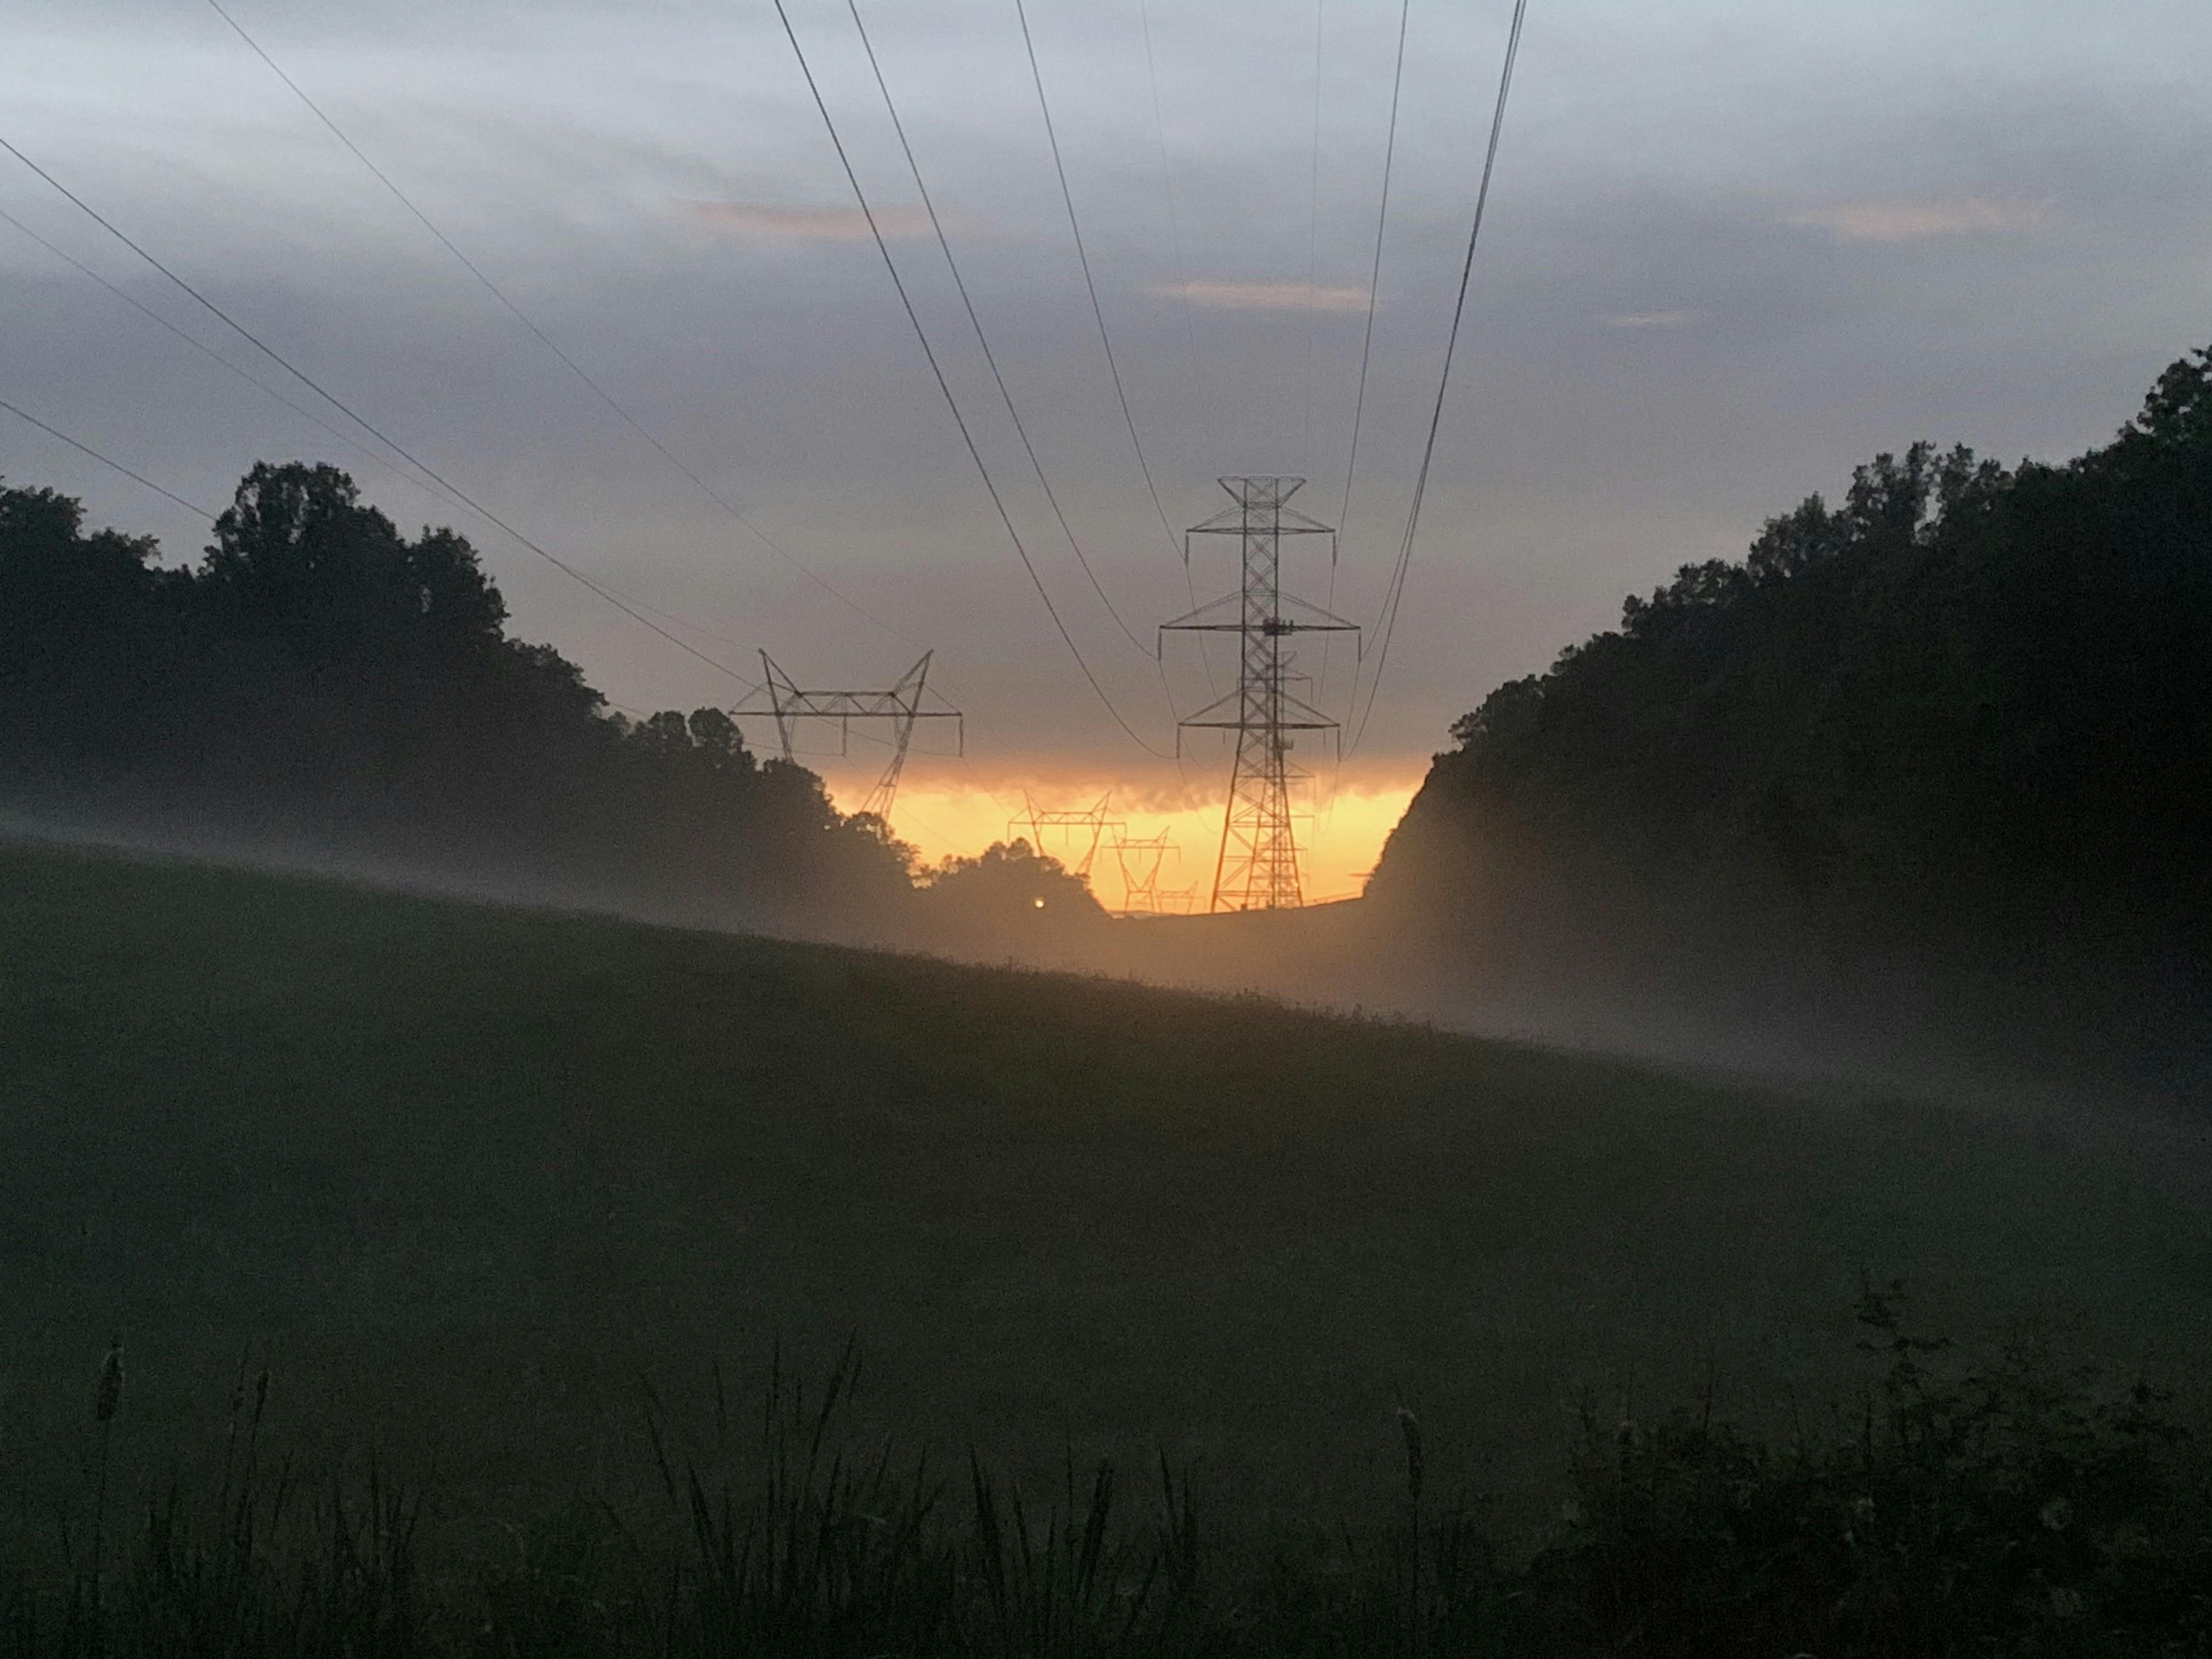 Fog settling in a hollow under power lines